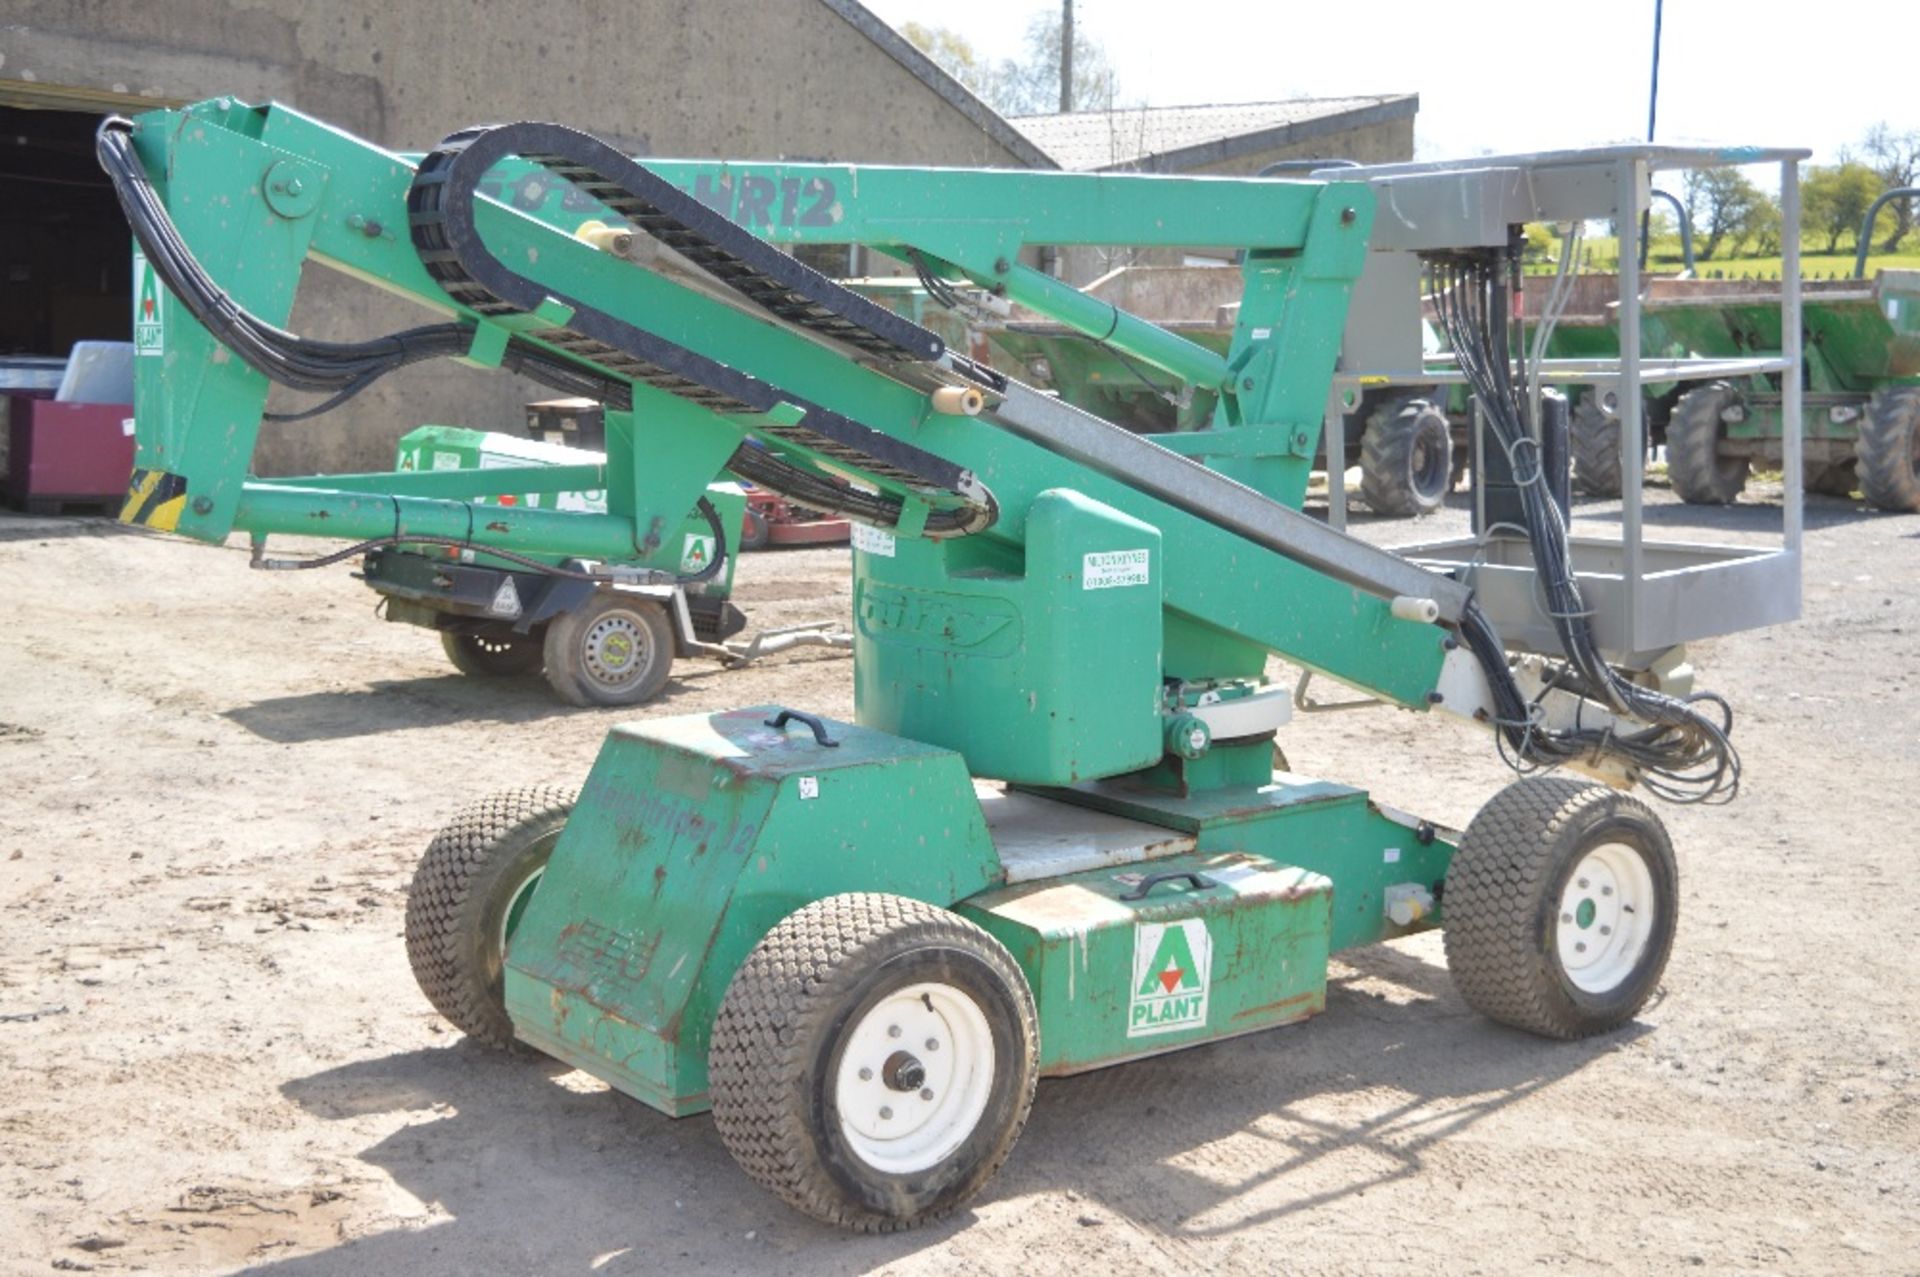 Nifty Lift HR 12 NDE diesel electric 12 metre boom lift   Year: 2007 S/N: 1217170 A448715 - Image 6 of 8